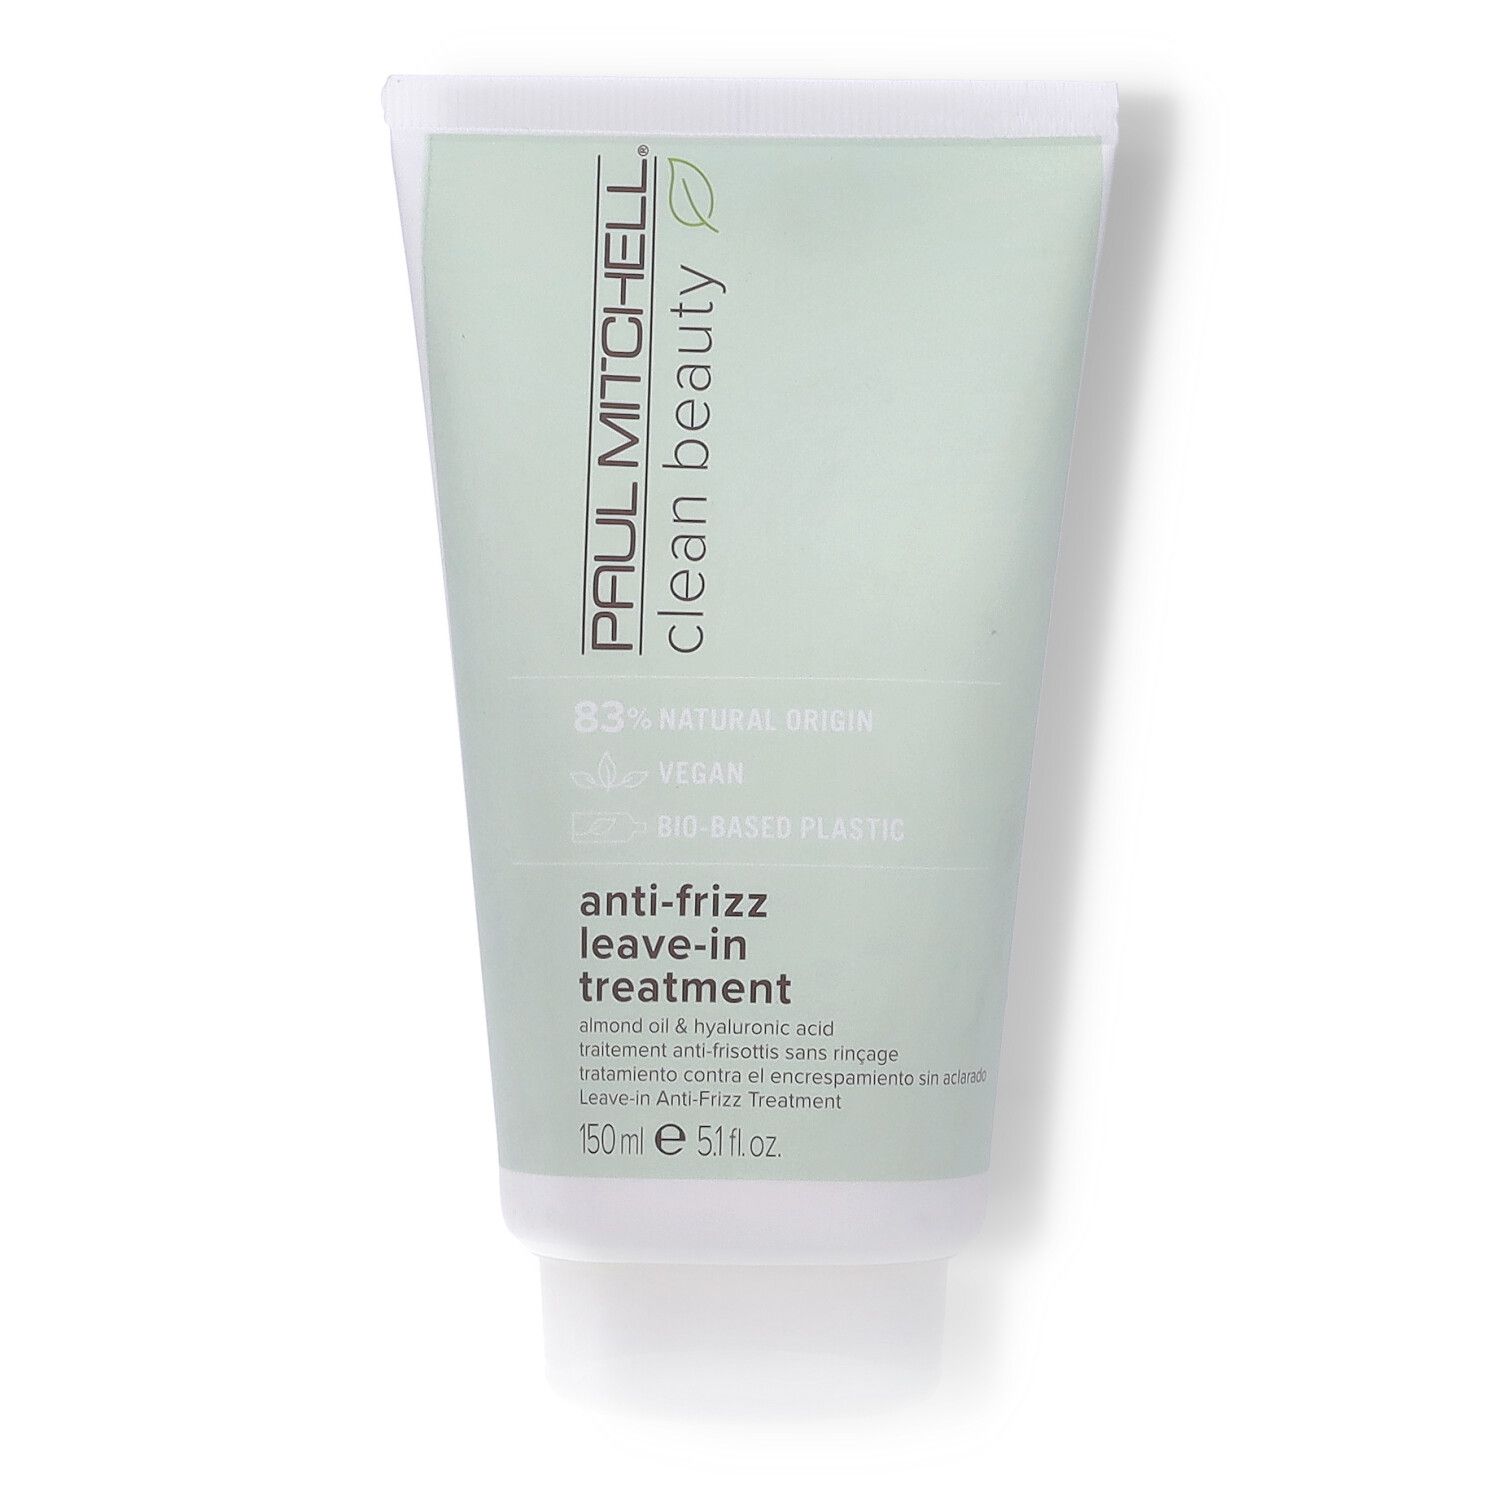 Paul Mitchell Clean Beauty Anti-frizz Leave-in Treatment 150ml